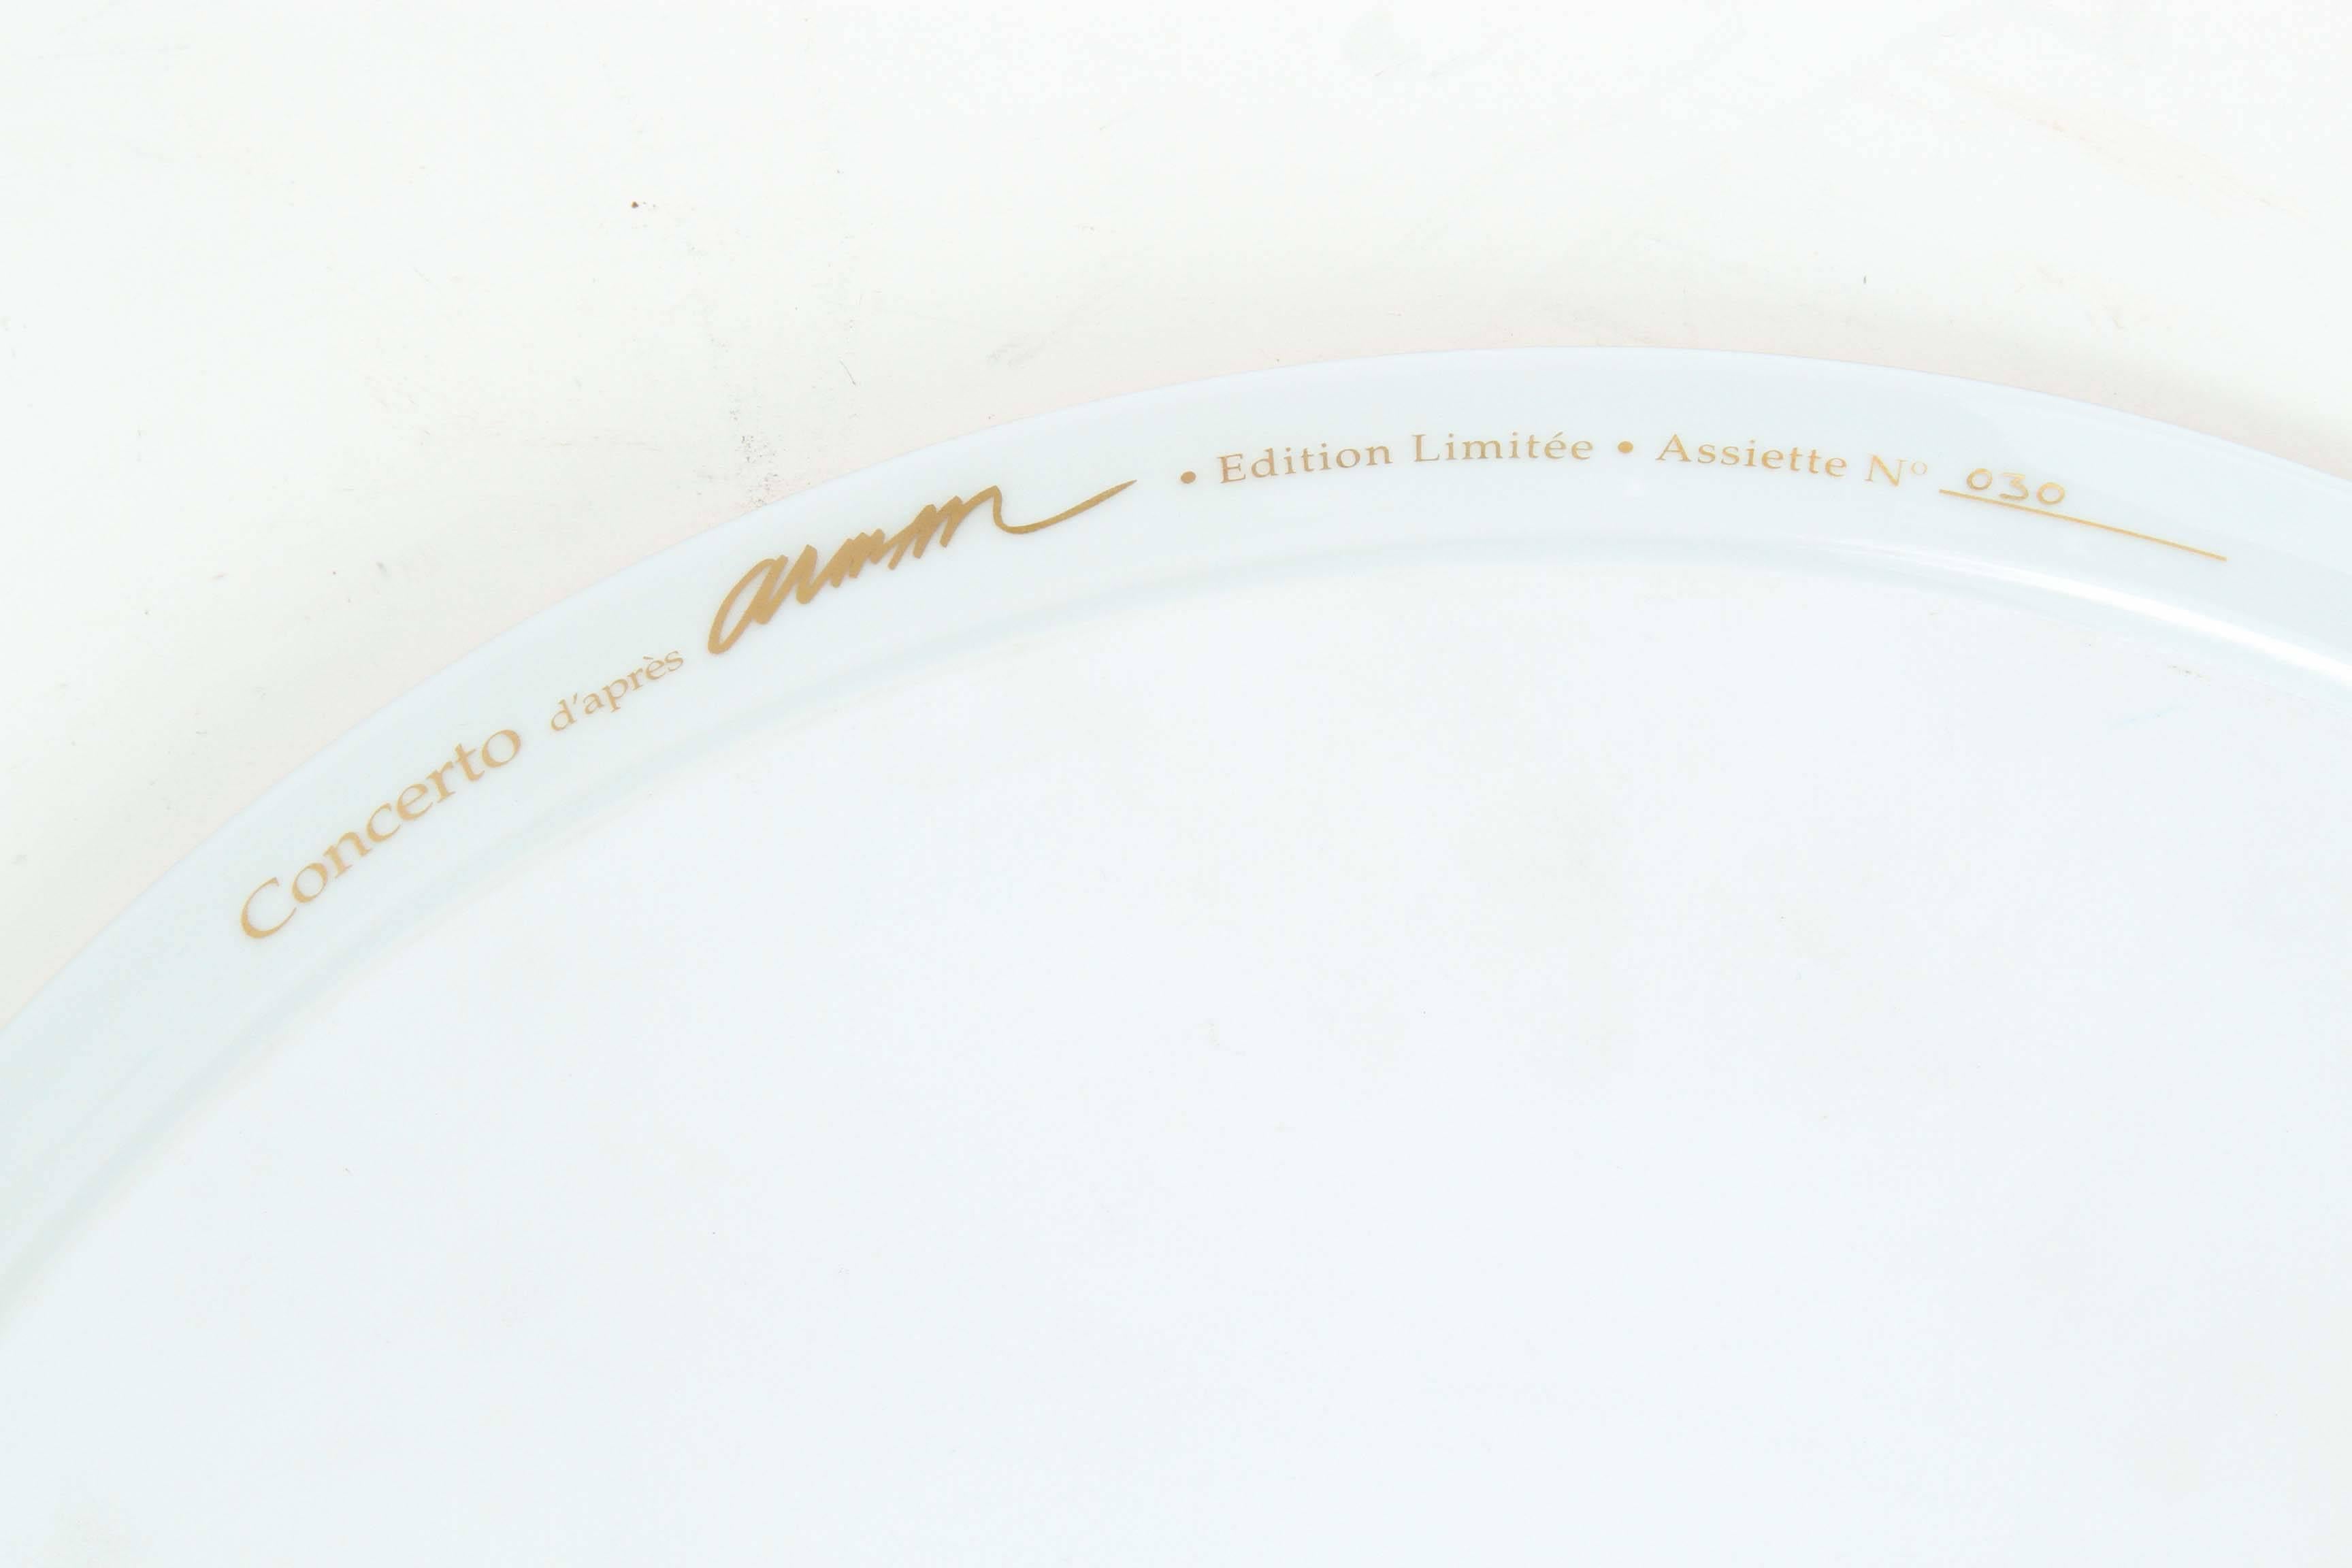 20th Century Concerto after Arman, Limited Edition, Plate Number 30 for Rosenthal For Sale